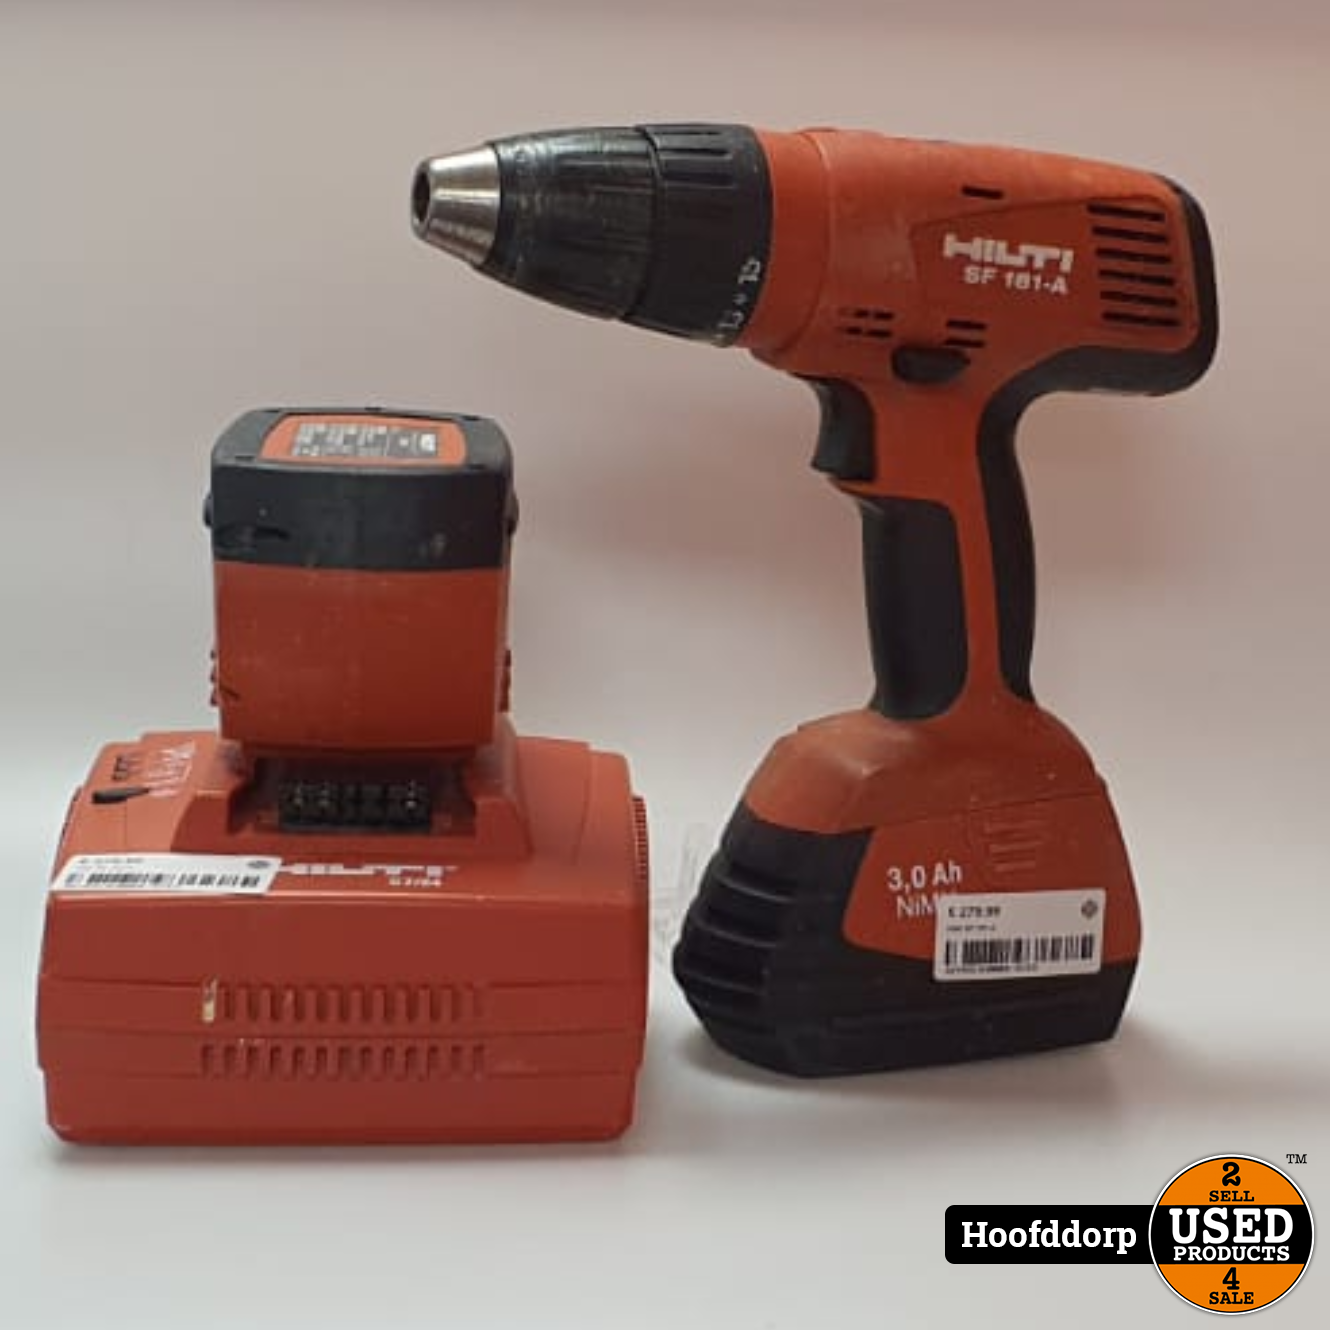 Hilti SF 181-A Used Products Hoofddorp